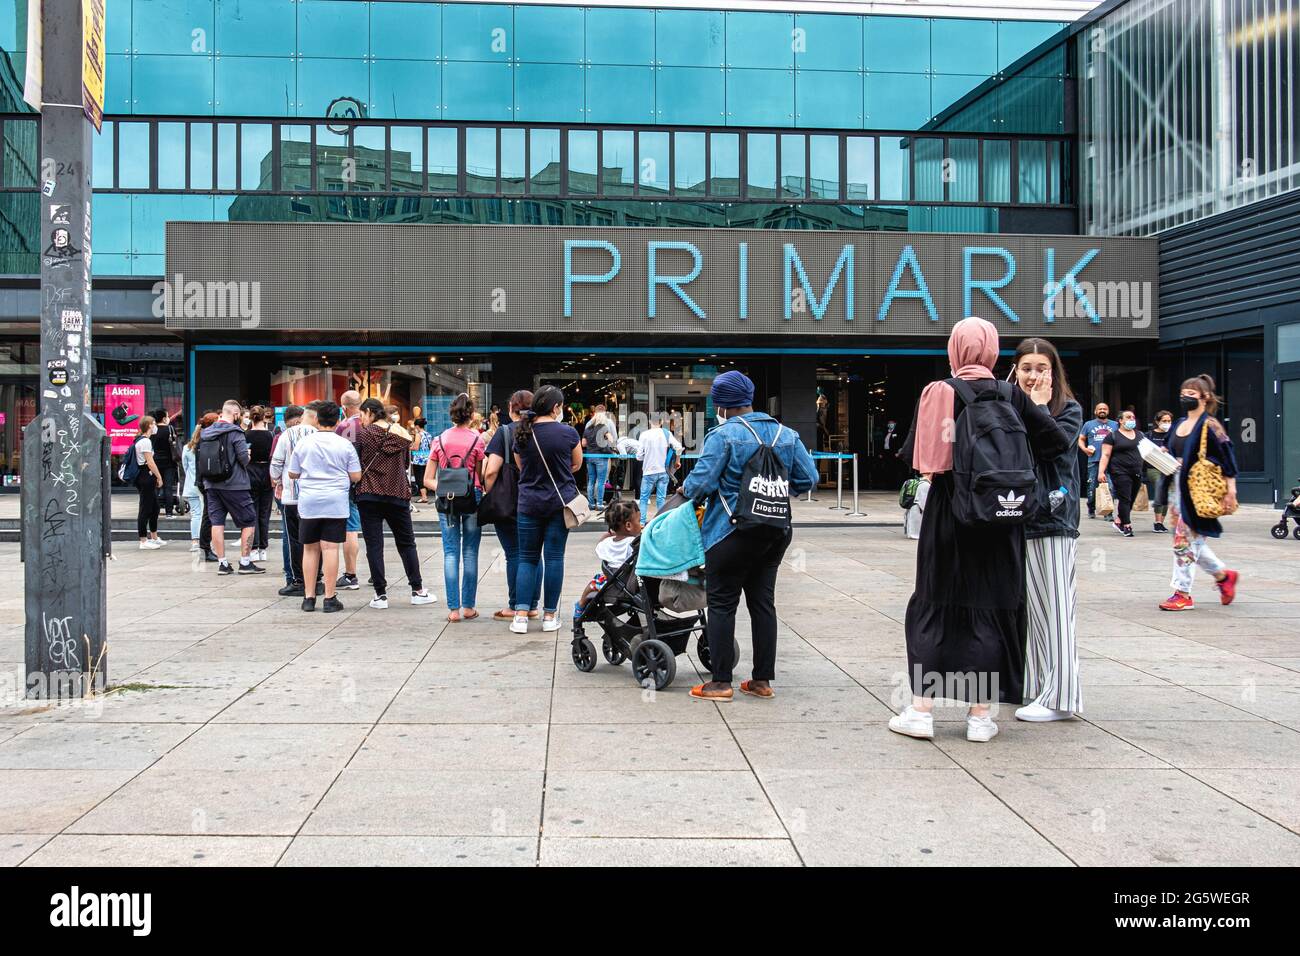 People wearing face masks queue outside Primark Clothing store during  Corona Pandemic, Alexanderplatz,Mitte,Berlin Stock Photo - Alamy